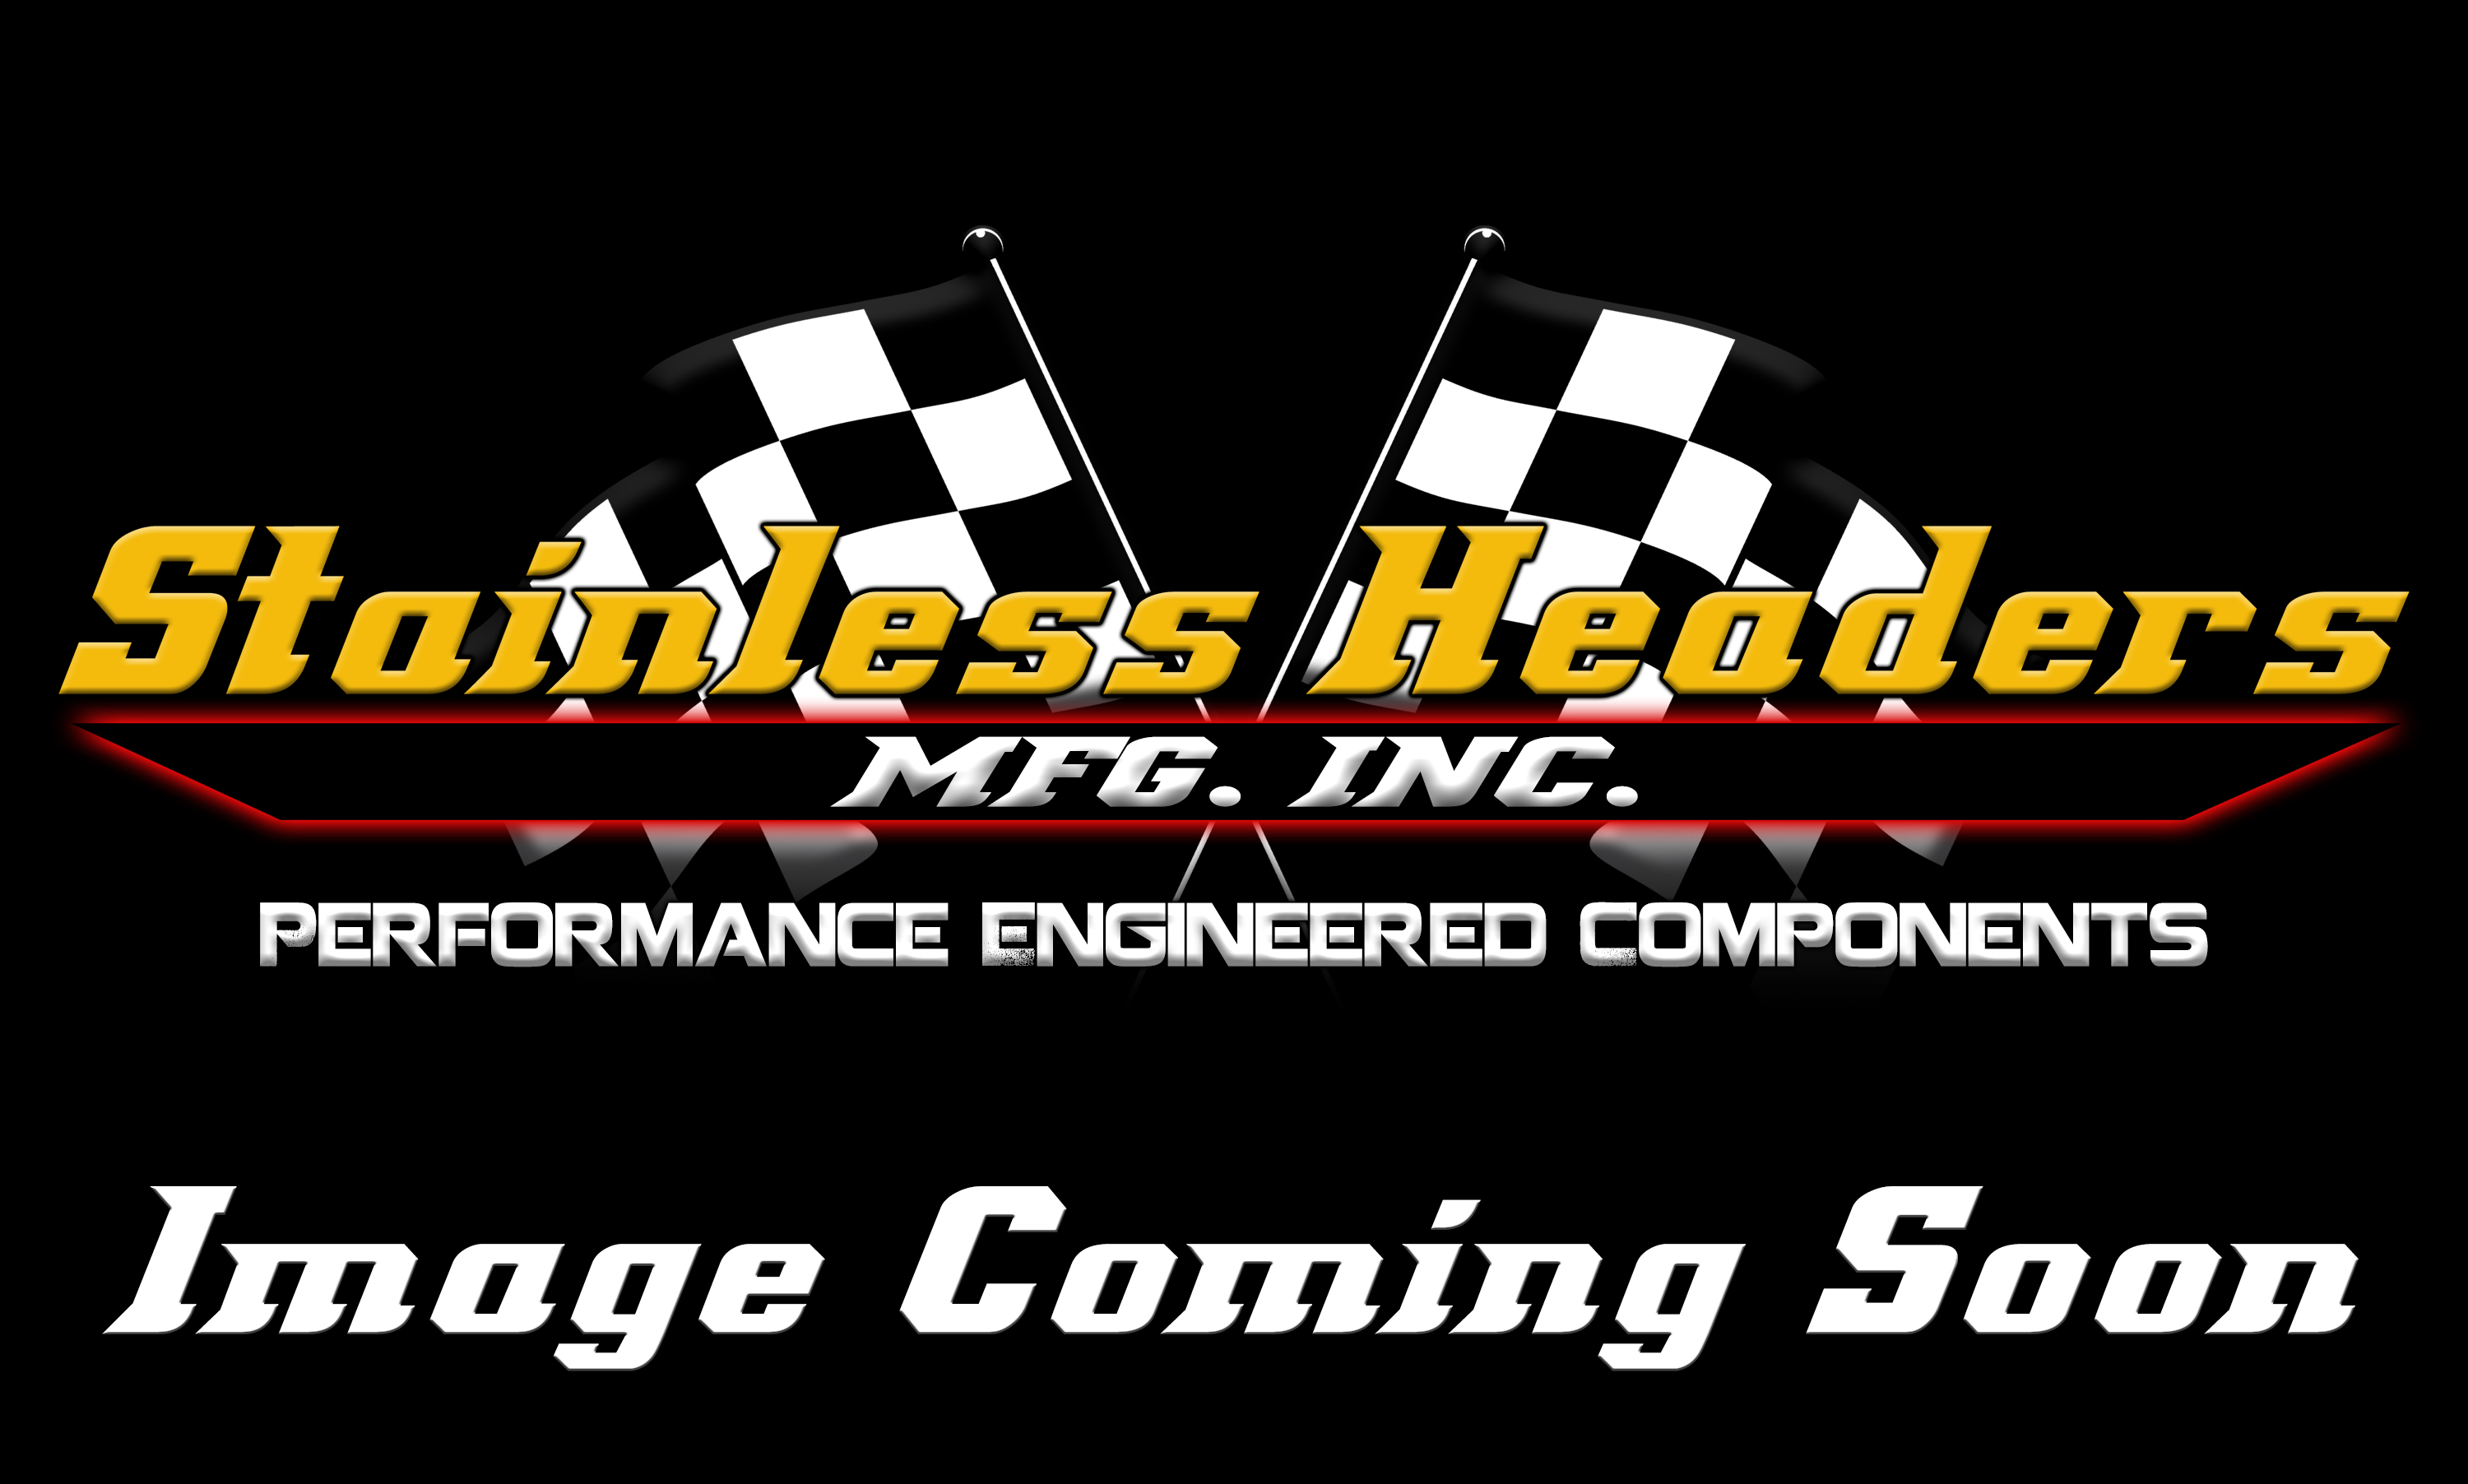 CompTurbo Technologies - CTR4202R-7485 Mid Frame 360 Journal Bearing Turbocharger (1300 HP) - Image 3